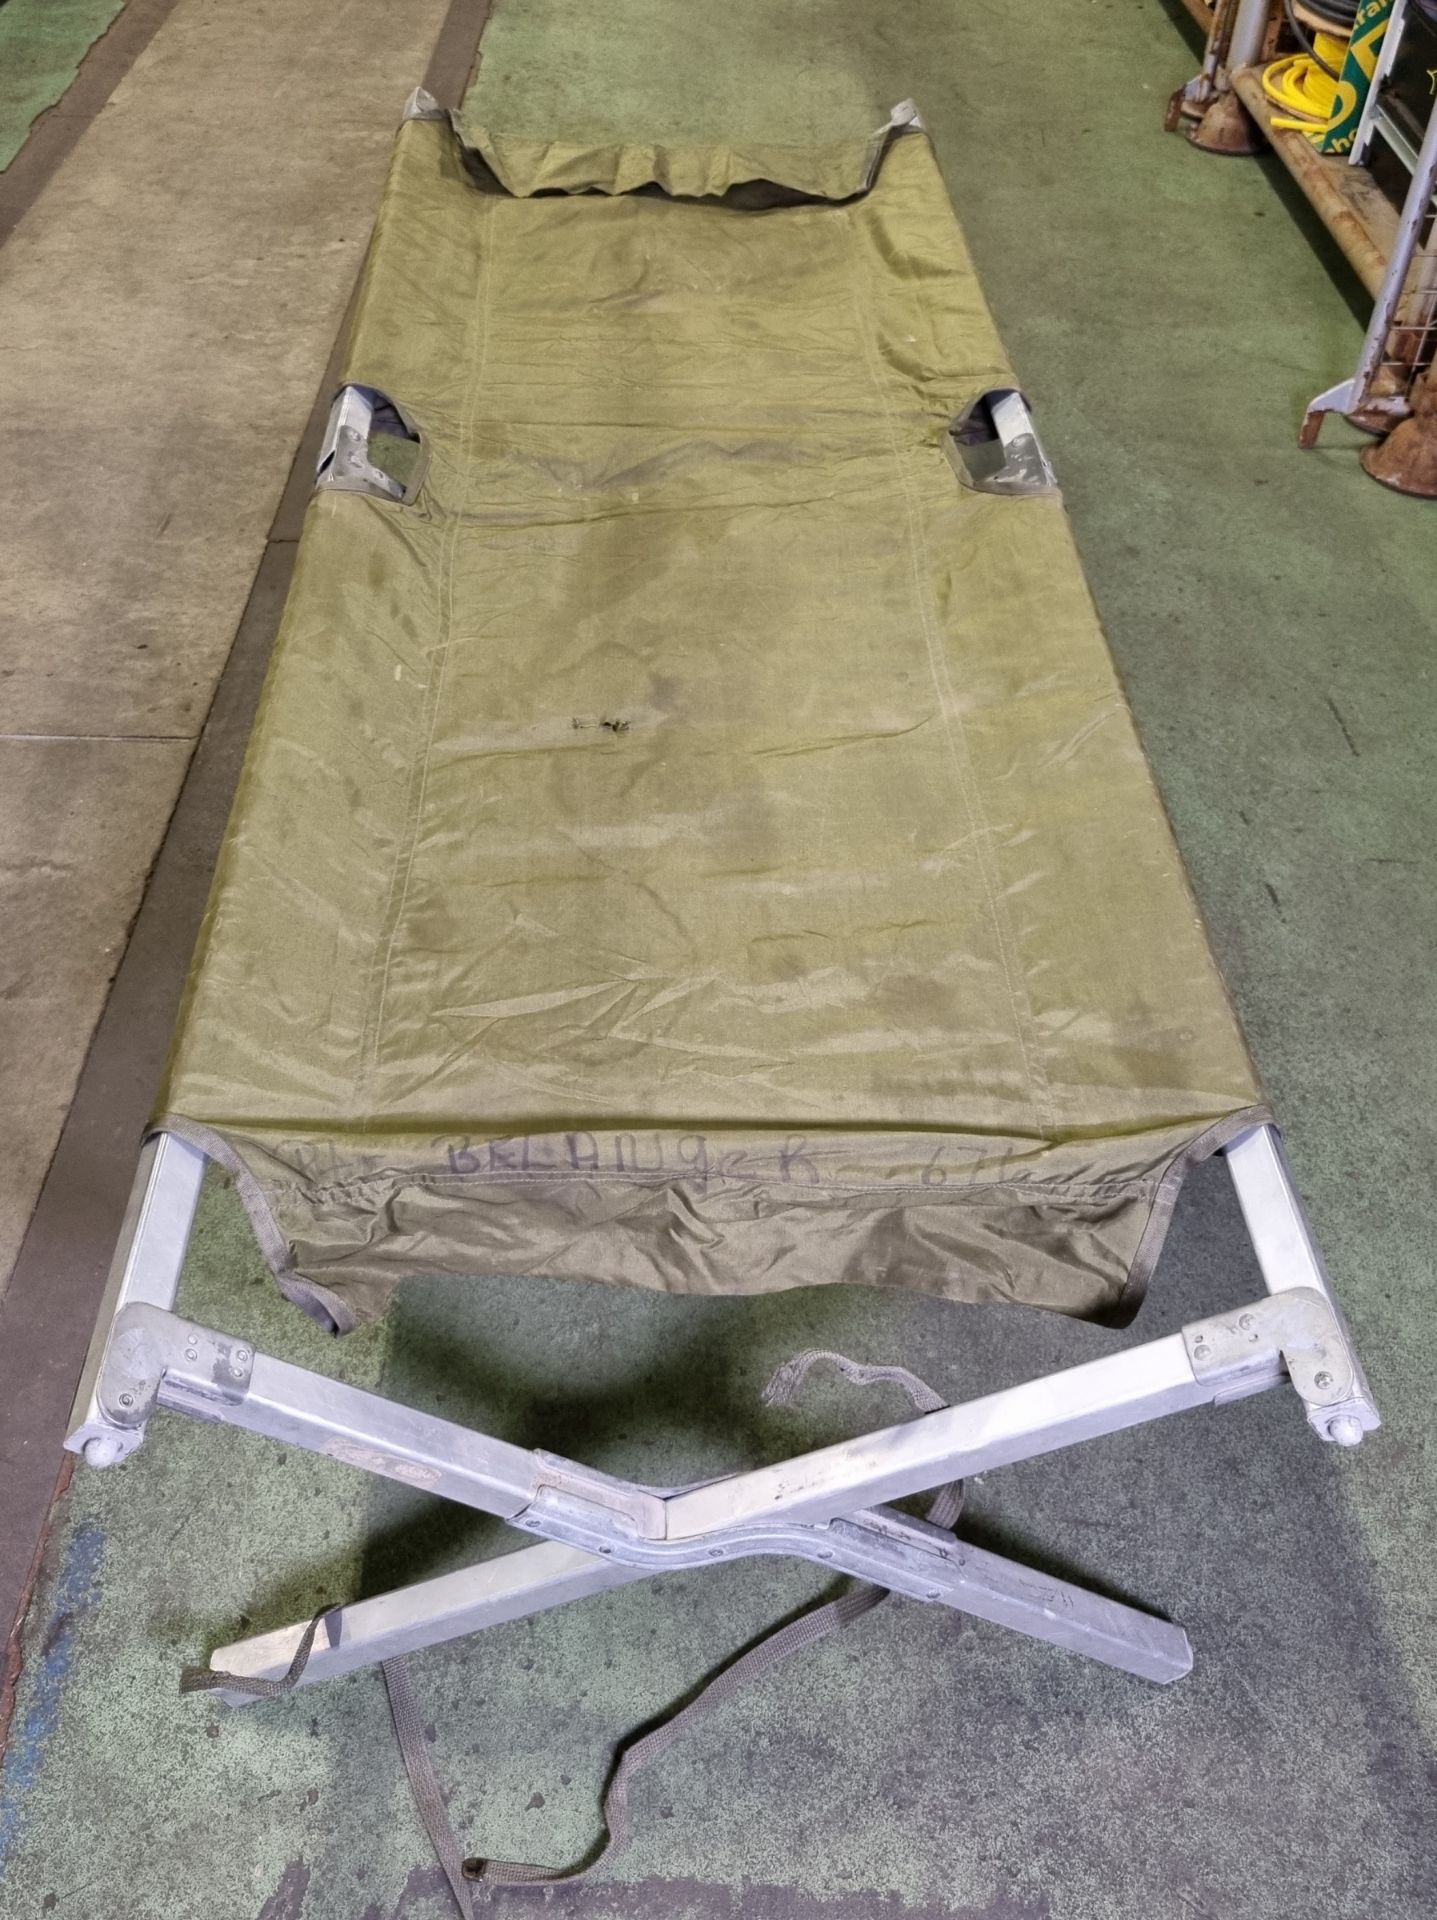 6x folding field cots - L 1900 x W 700 x H 450mm - SPARES OR REPAIRS - Image 3 of 5